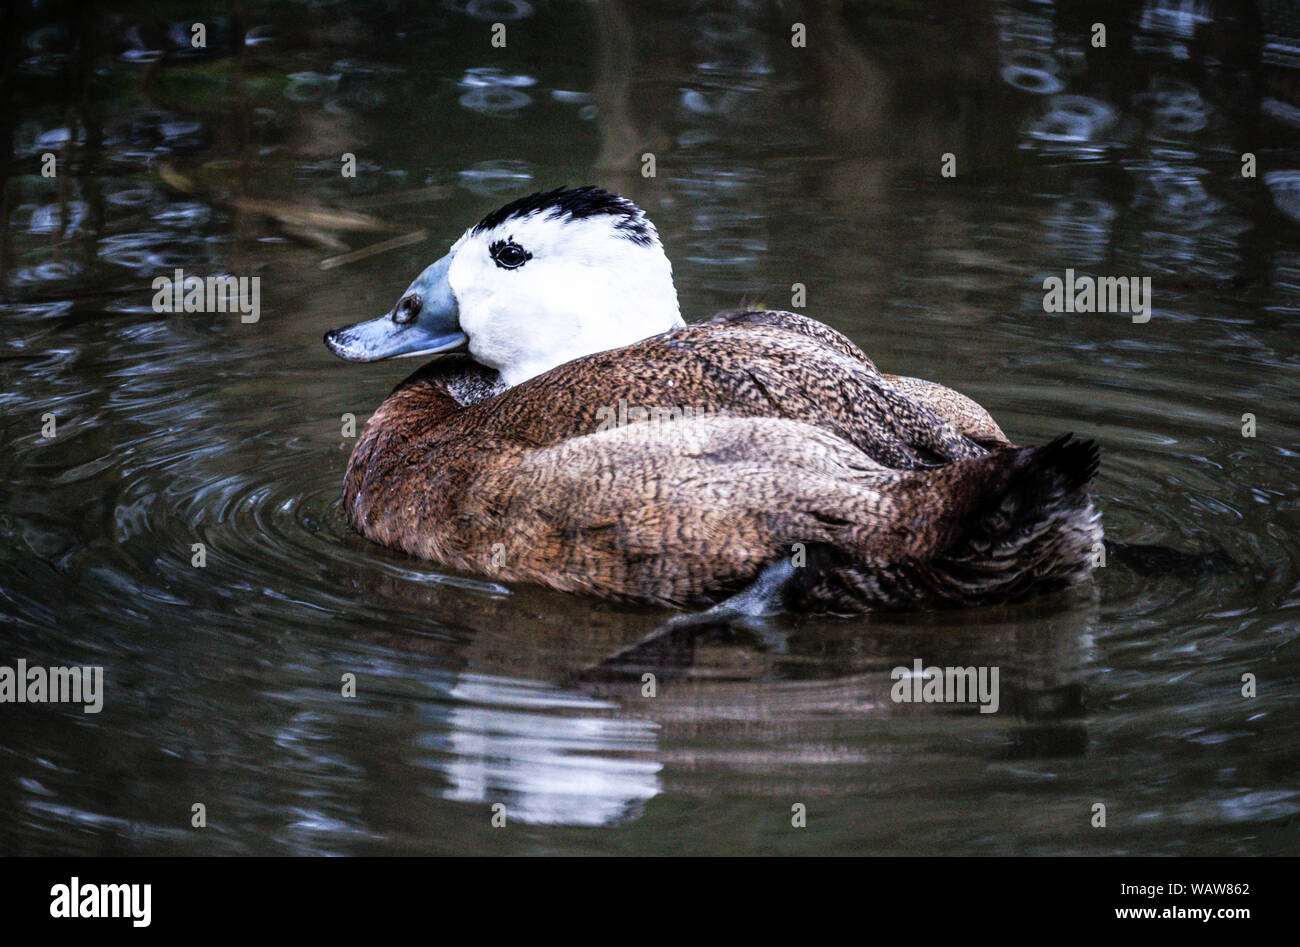 White-headed Duck (Oxyura leucocephala).Male in breeding plumage.A rare European species.Interbreeding with the North Amer.Ruddy Duck is a problem. Stock Photo